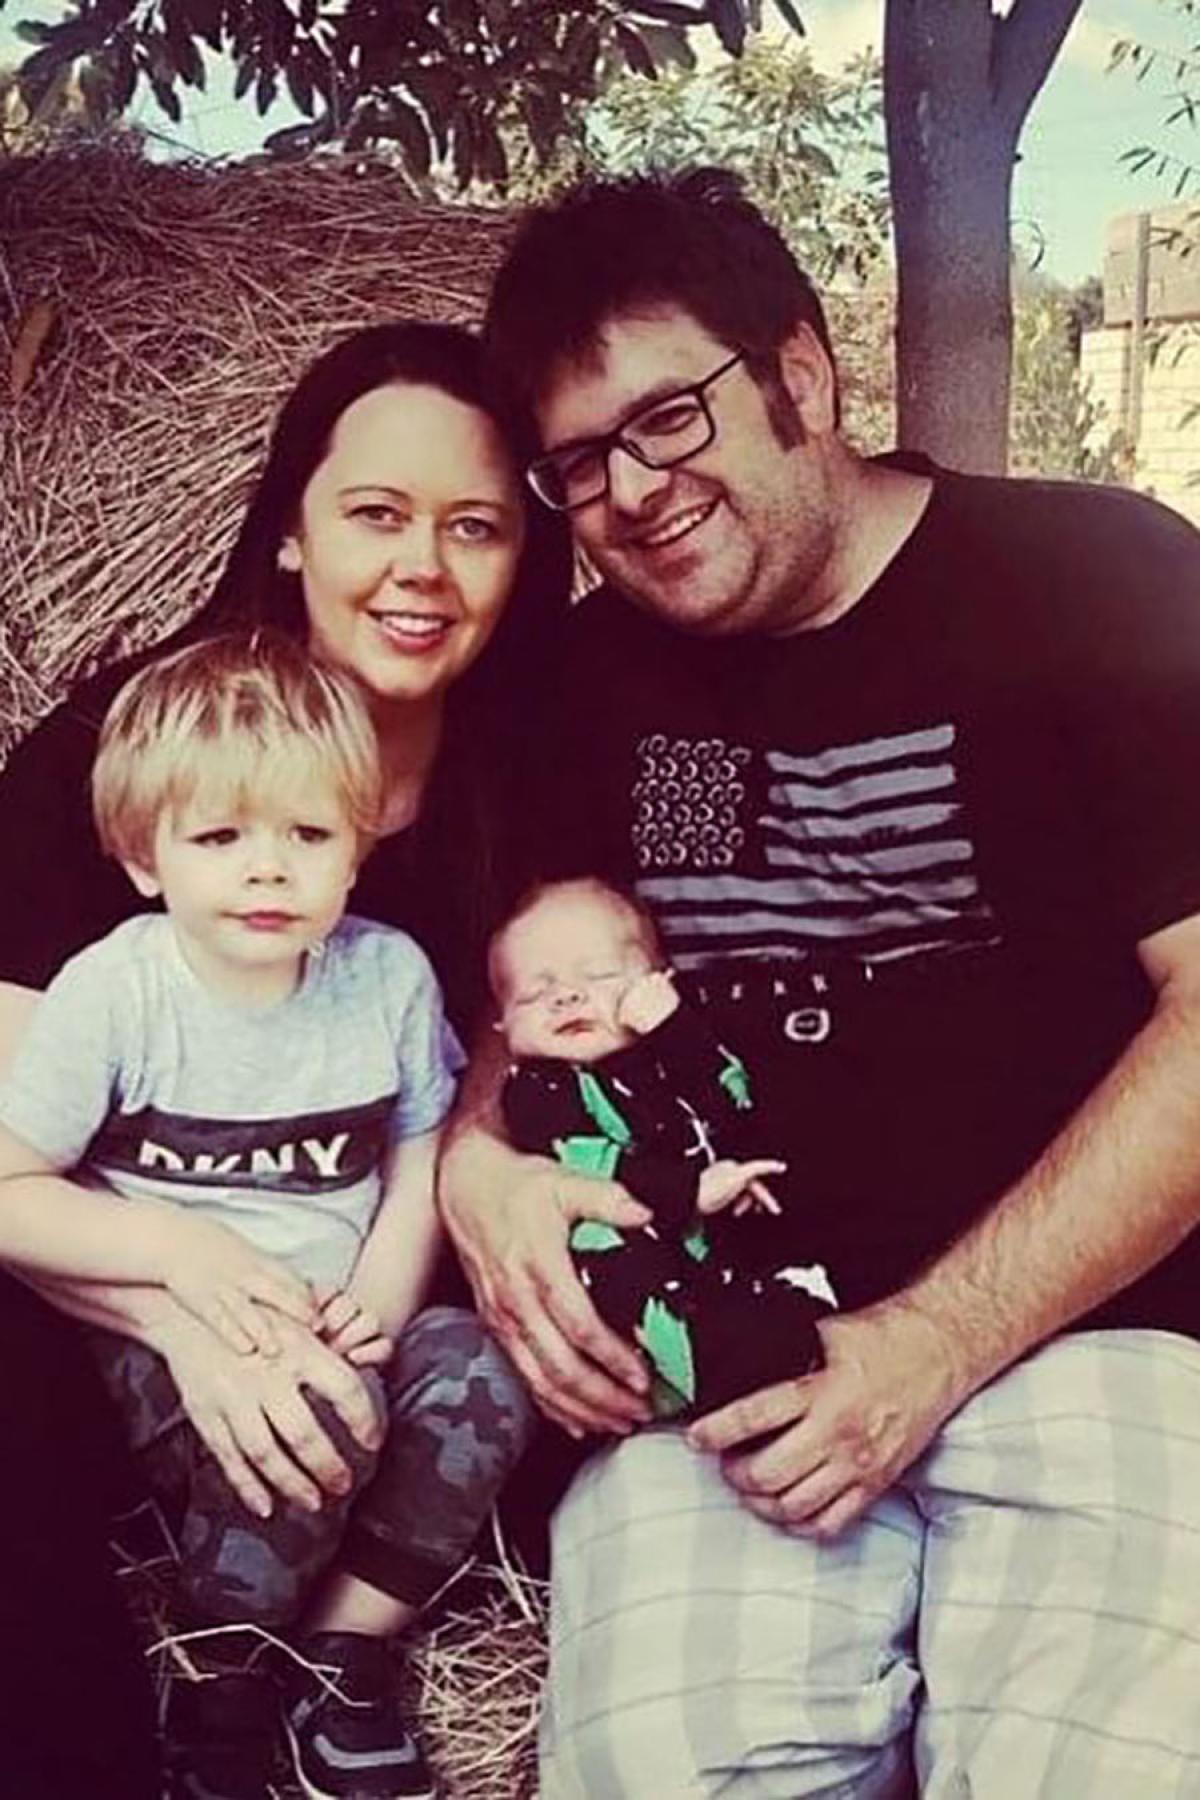 Linda with her husband and two young children weeks before her diagnosis